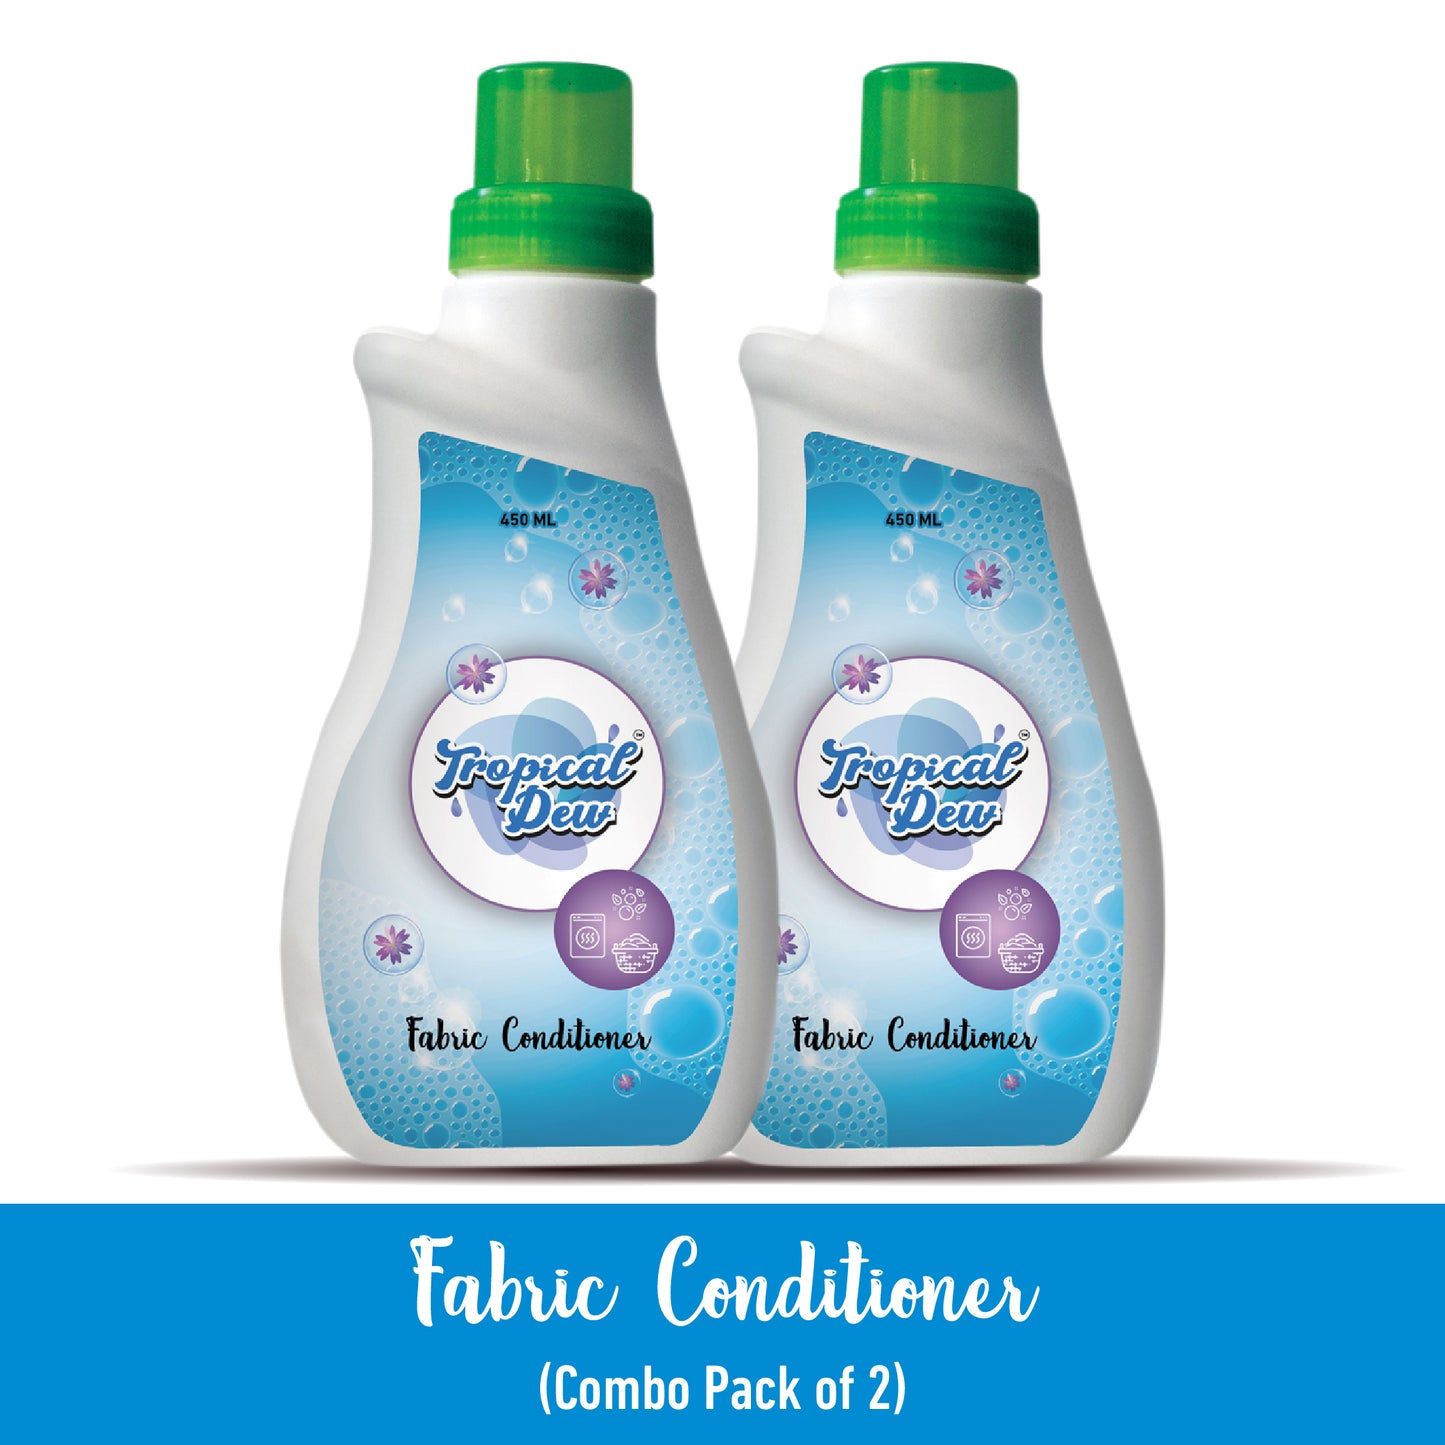 Tropical Dew Fabric Conditioner and Softener-Lavender & Aqua Fragrance combo pack of 2 -450ml each